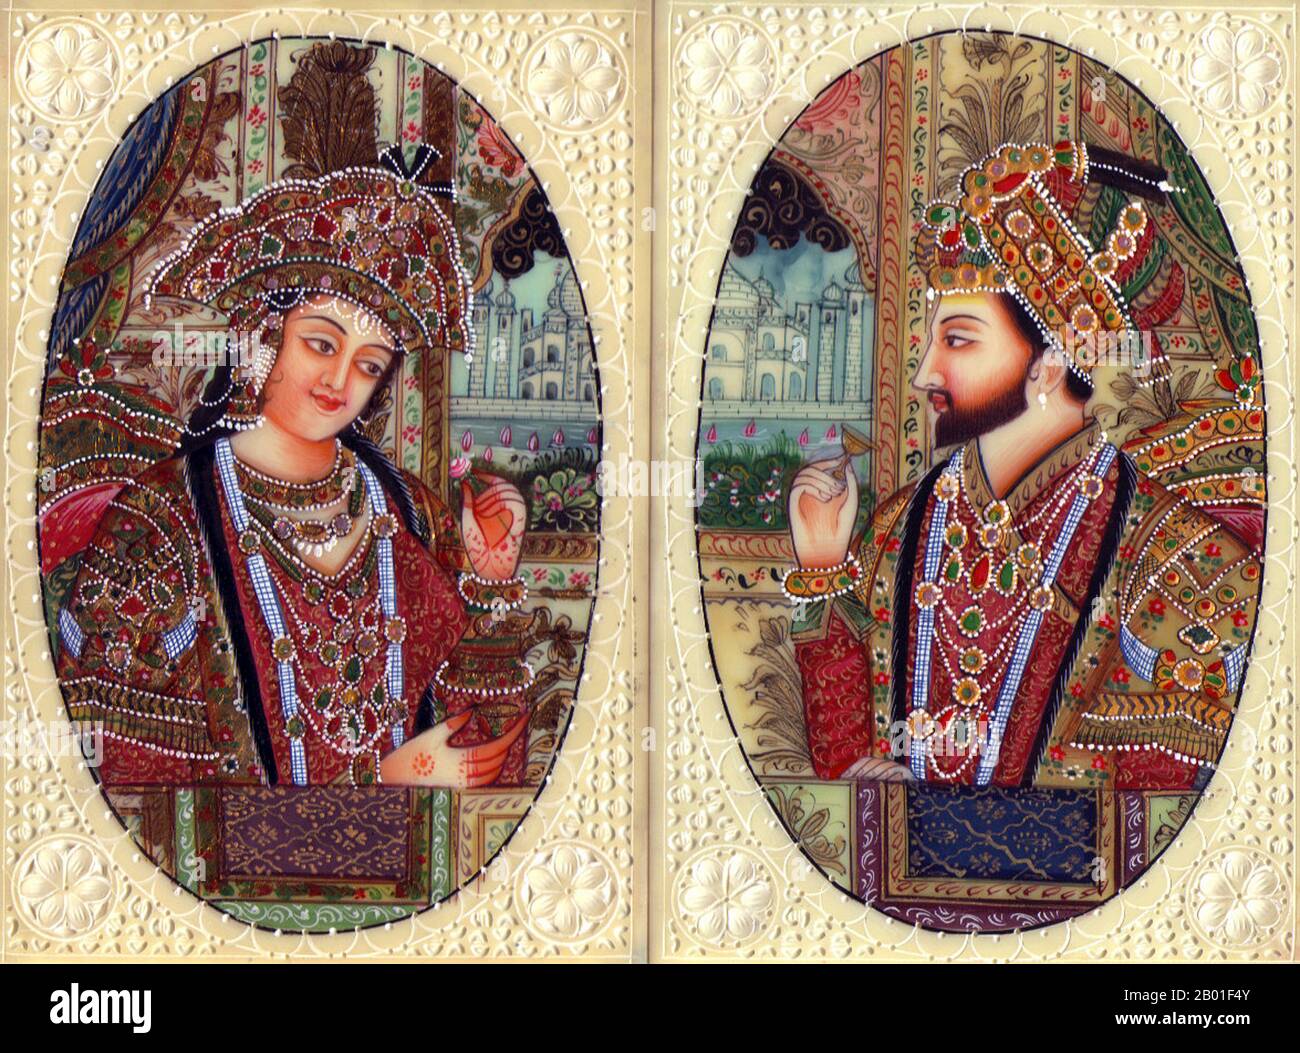 India: Shah Jahan (5 January 1592 - 22 January 1666) and Mumtaz Mahal (29 October 1593 - 17 June 1631) in twin portraits, Mughal style, c. early 20th century.  Shah Jahan was the emperor of the Mughal Empire in the Indian Subcontinent from 1628 until 1658. The name Shah Jahan comes from Persian meaning 'King of the World'.  He was the fifth Mughal emperor after Babur, Humayun, Akbar and Jahangir.  Mumtaz Mahal, born Arjumand Banu Begum, was a Mughal Empress and chief consort of Emperor Shah Jahan. The Taj Mahal in Agra was constructed by her husband as her tomb and a symbol of his undying love Stock Photo